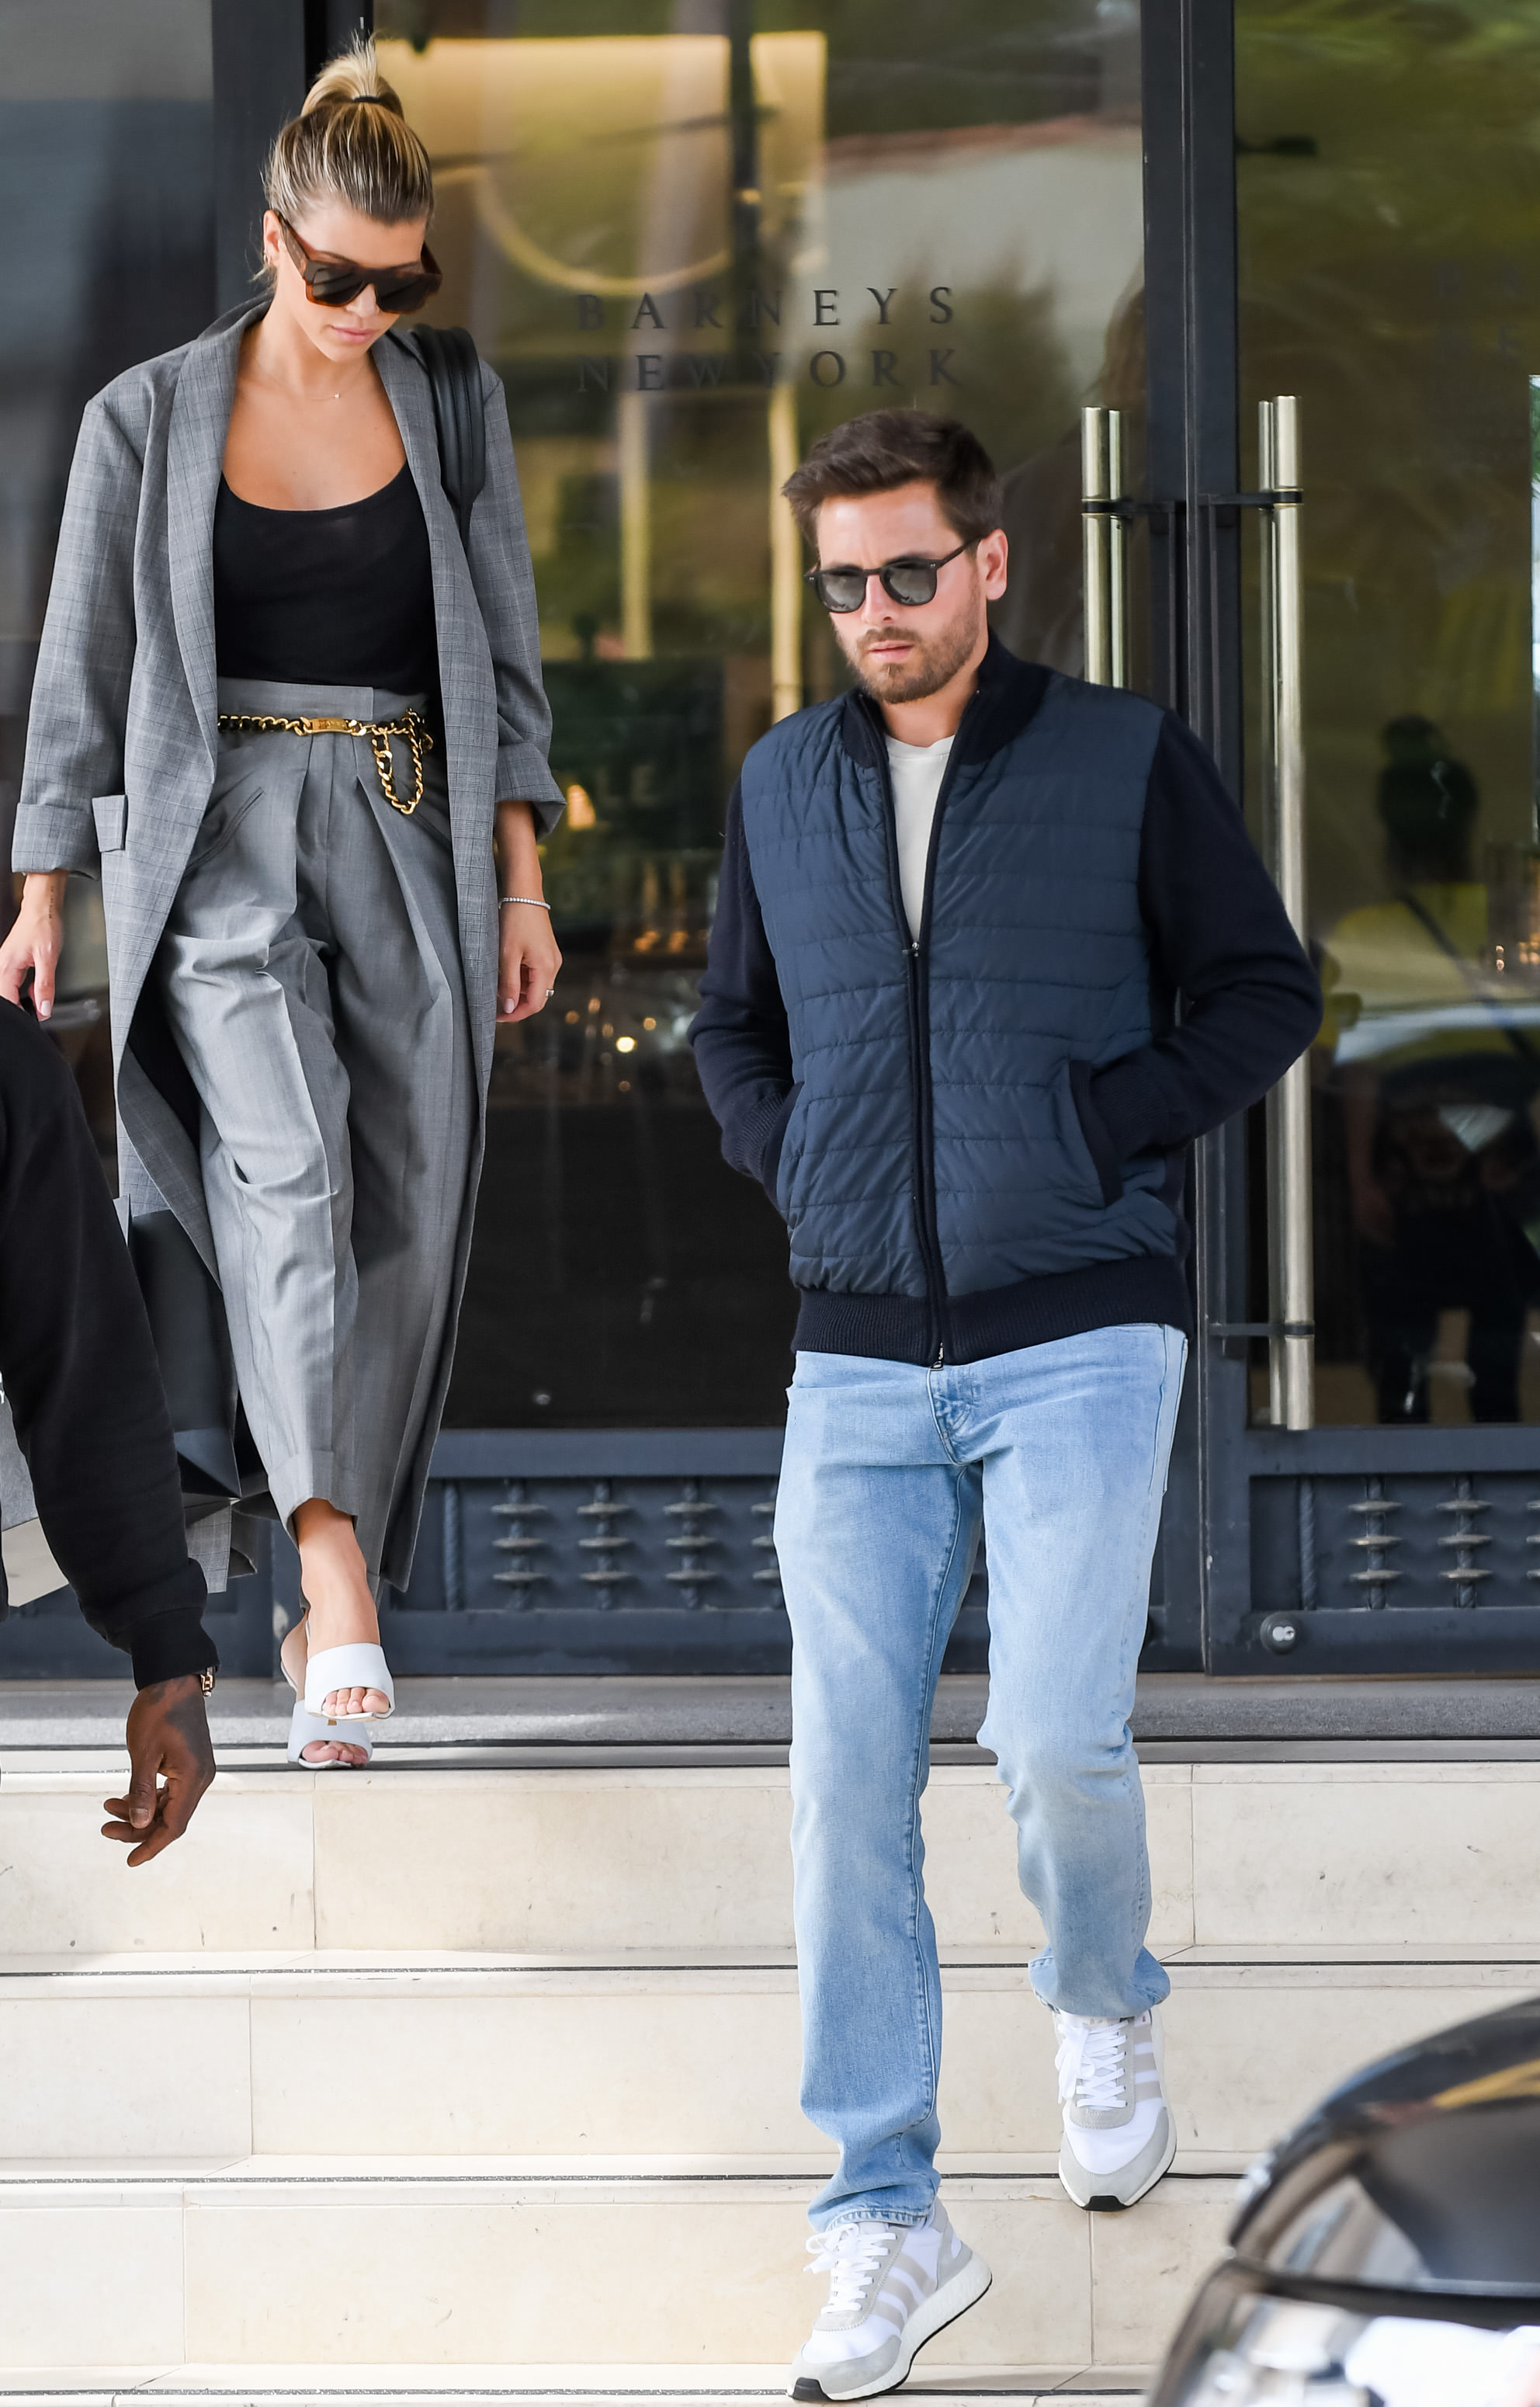 Sofia Richie Cuts Sophisticated Figure While Shopping With Scott